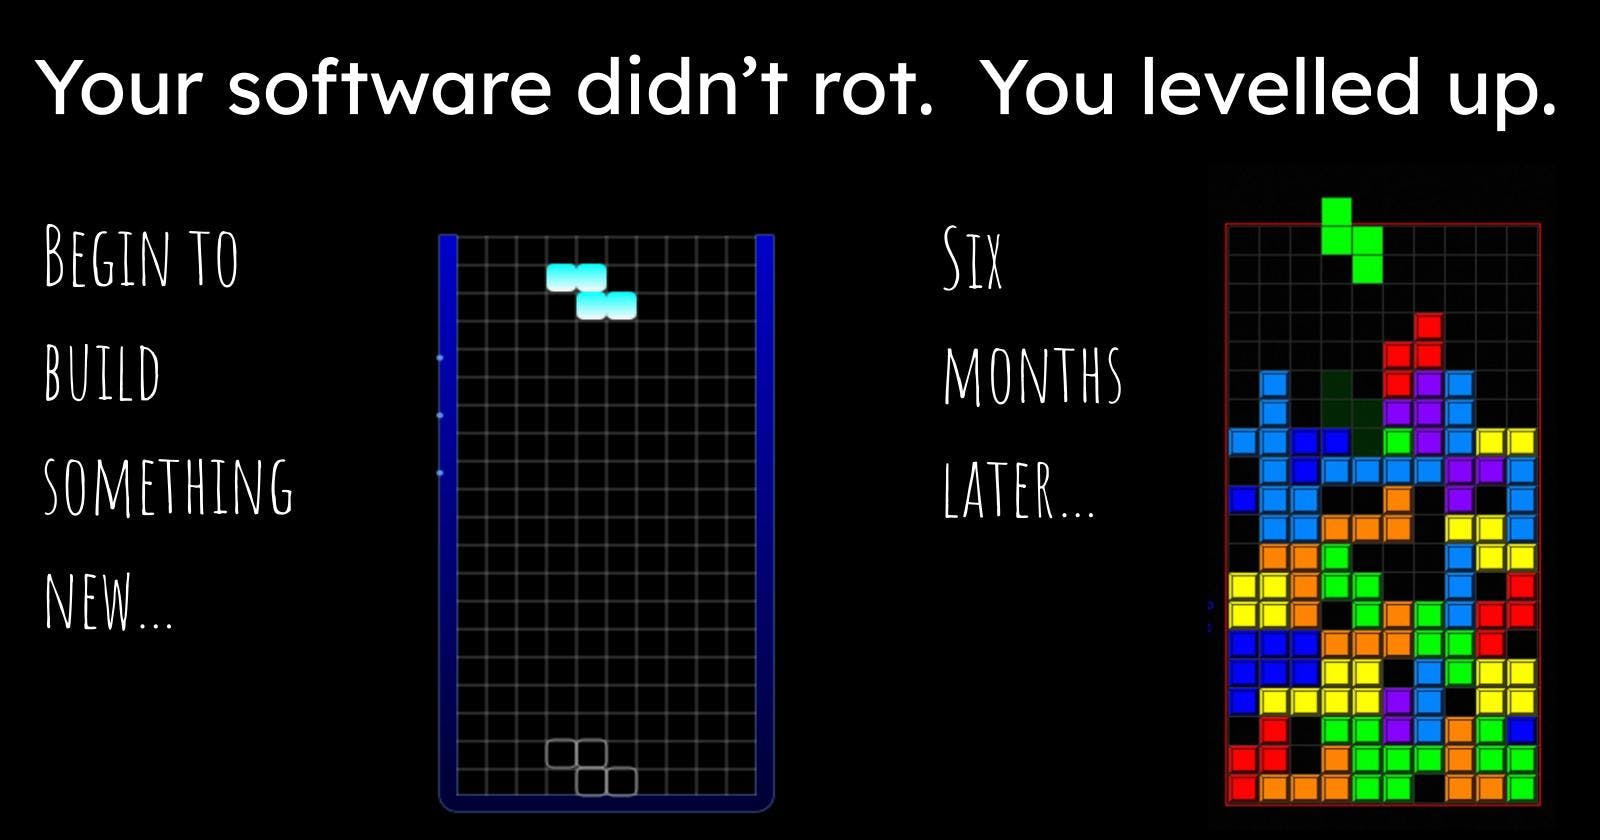 Your software didn’t rot. You levelled up.